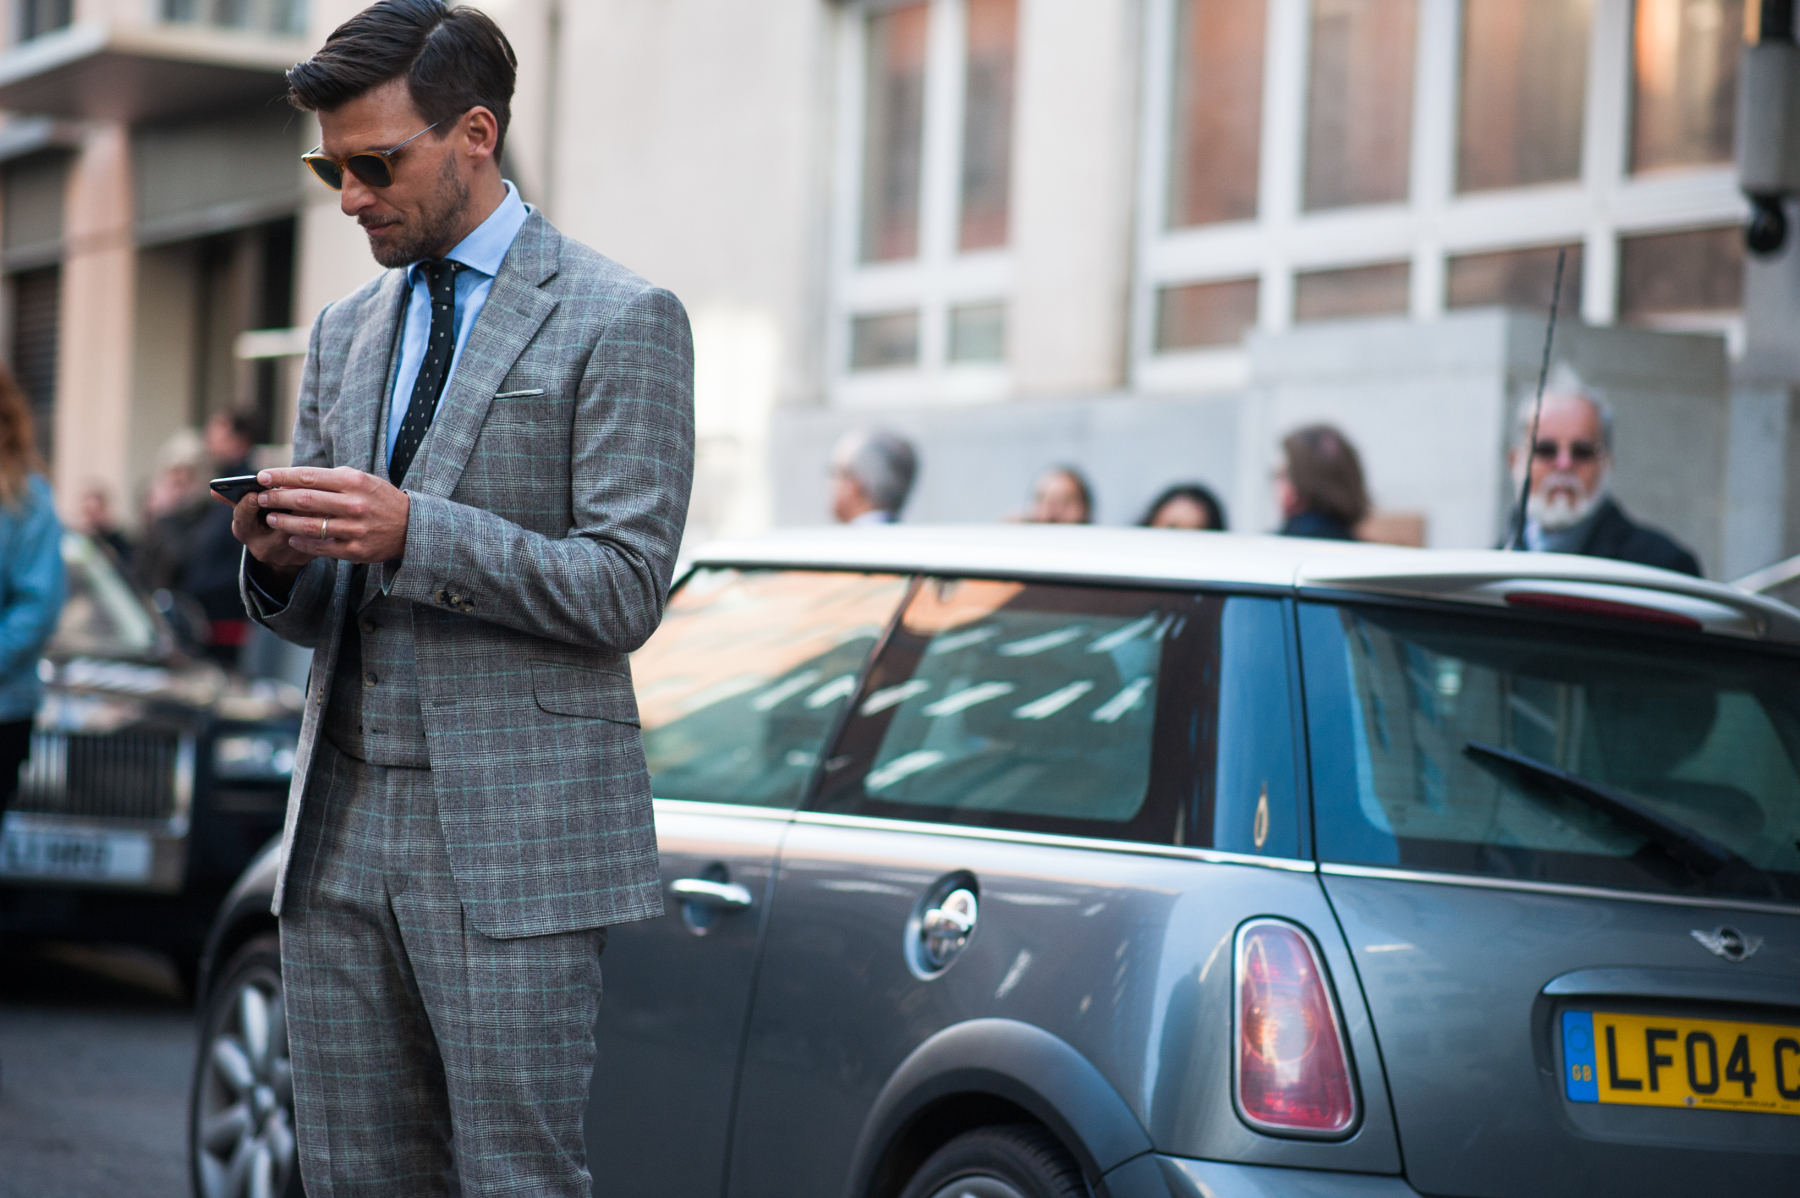 Styling Suits with Sneakers: A Gentleman’s Guide